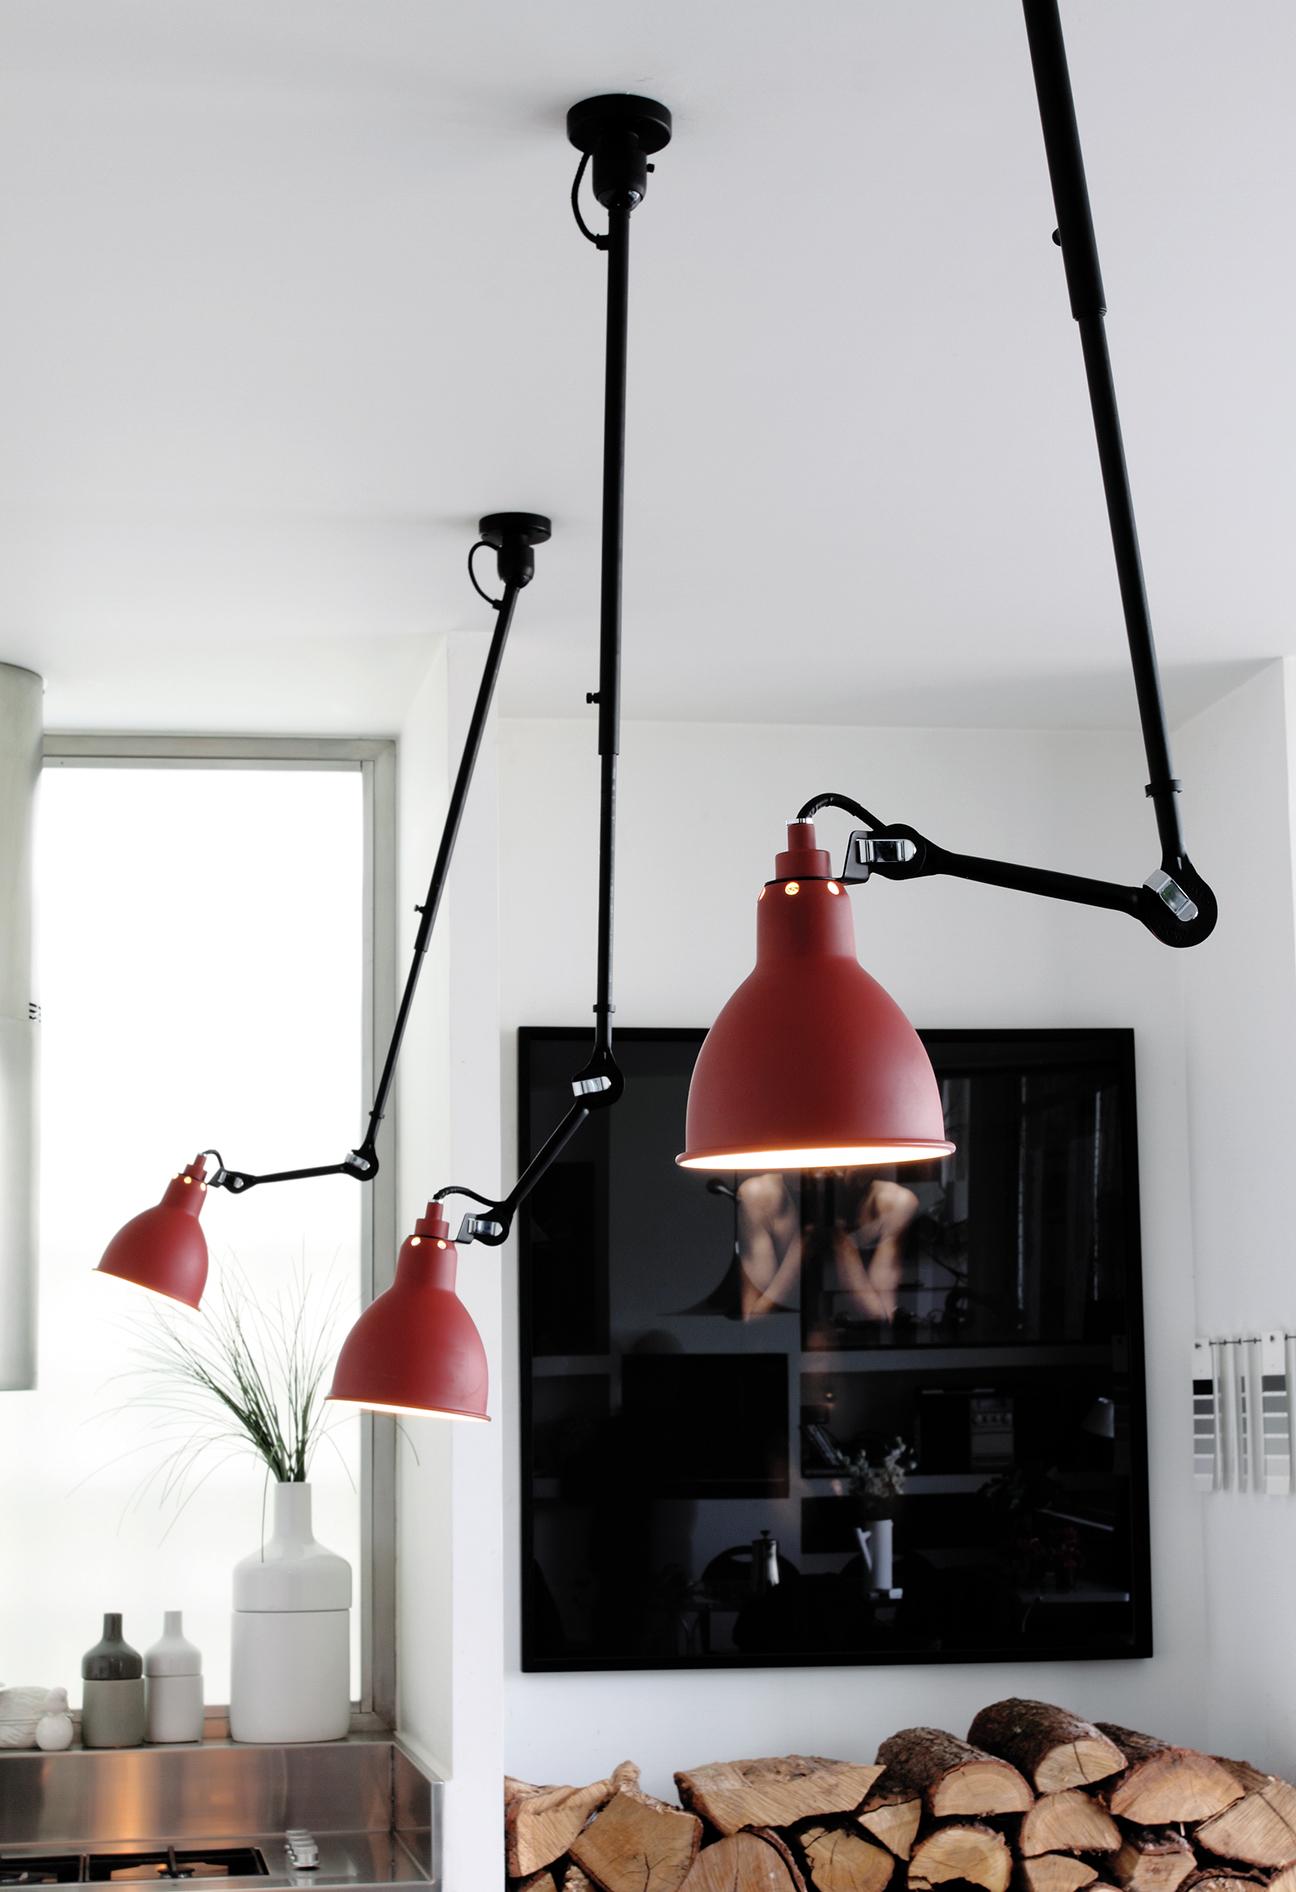 Steel DCW Editions La Lampe Gras N°302 Pendant Light in Black Arm and White Shade For Sale